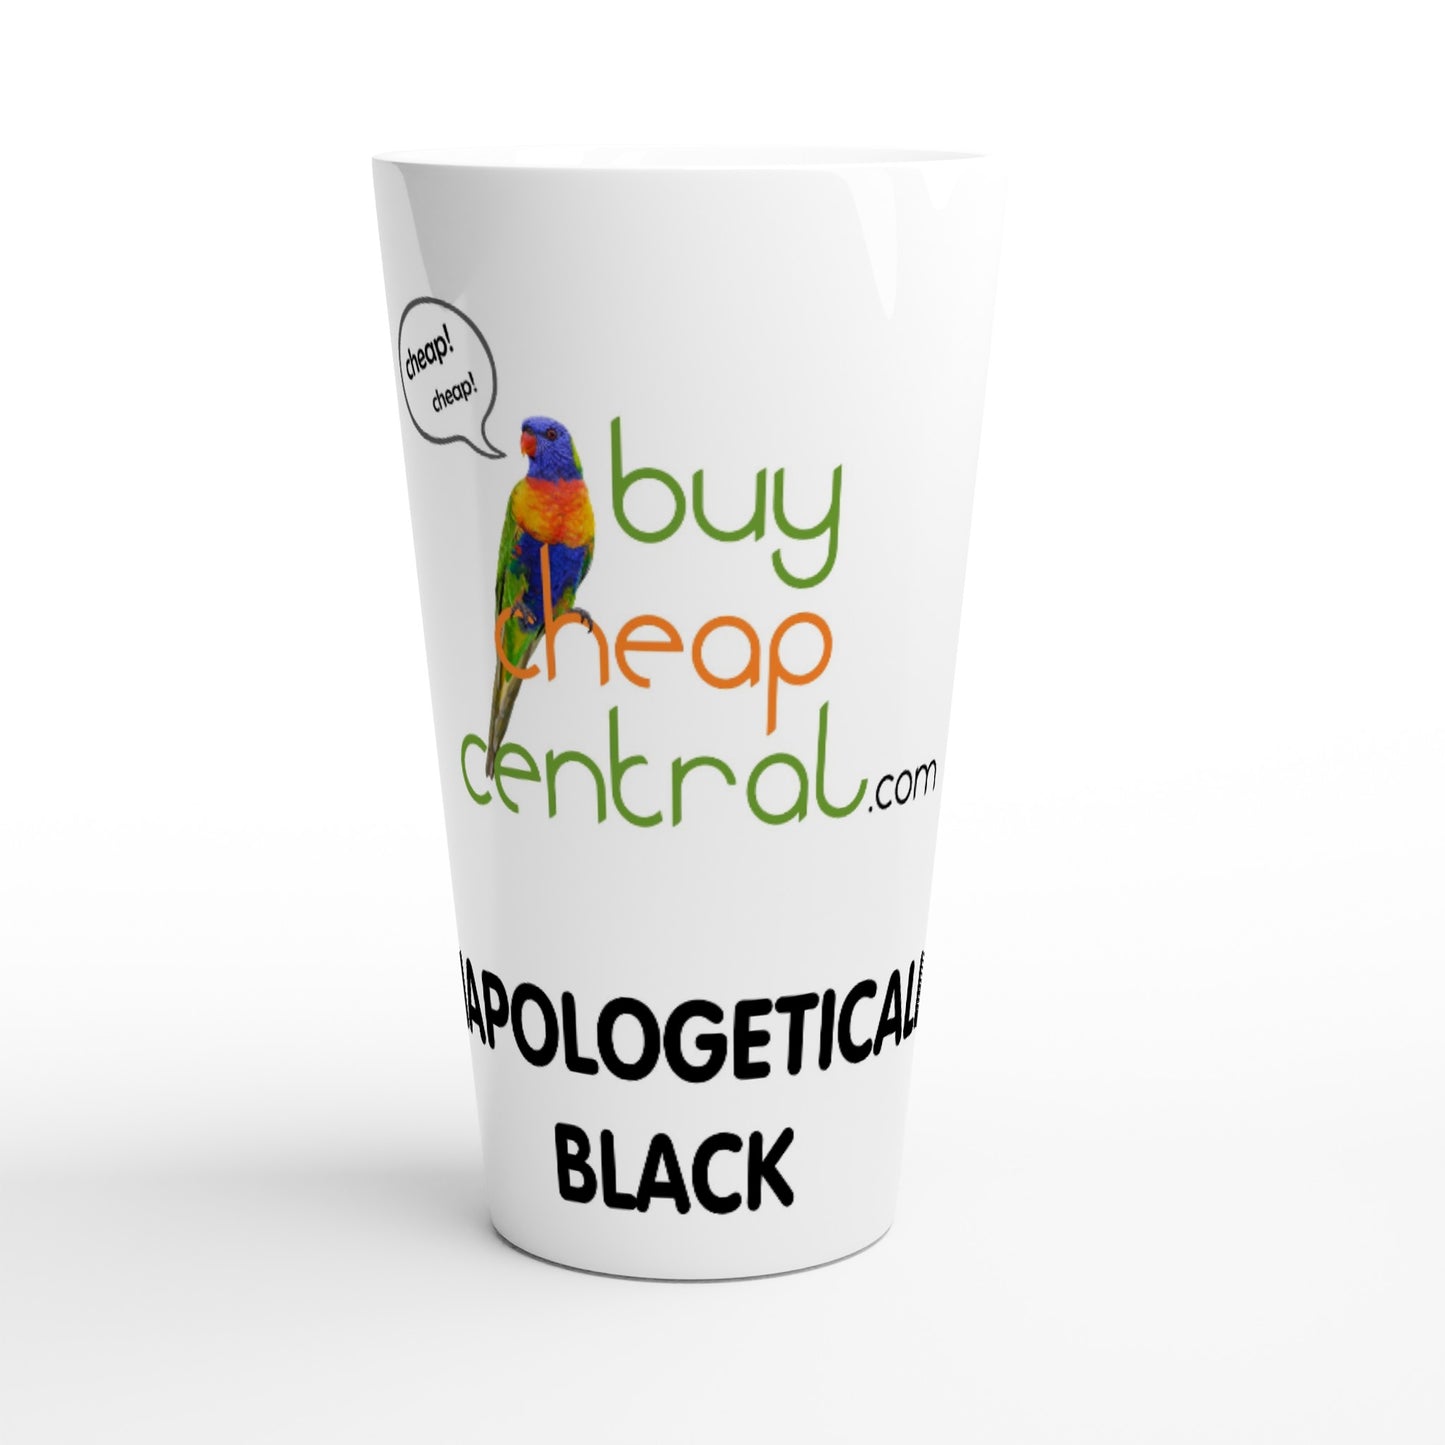 Unapologetically BLACK - Mugs & Water Bottles